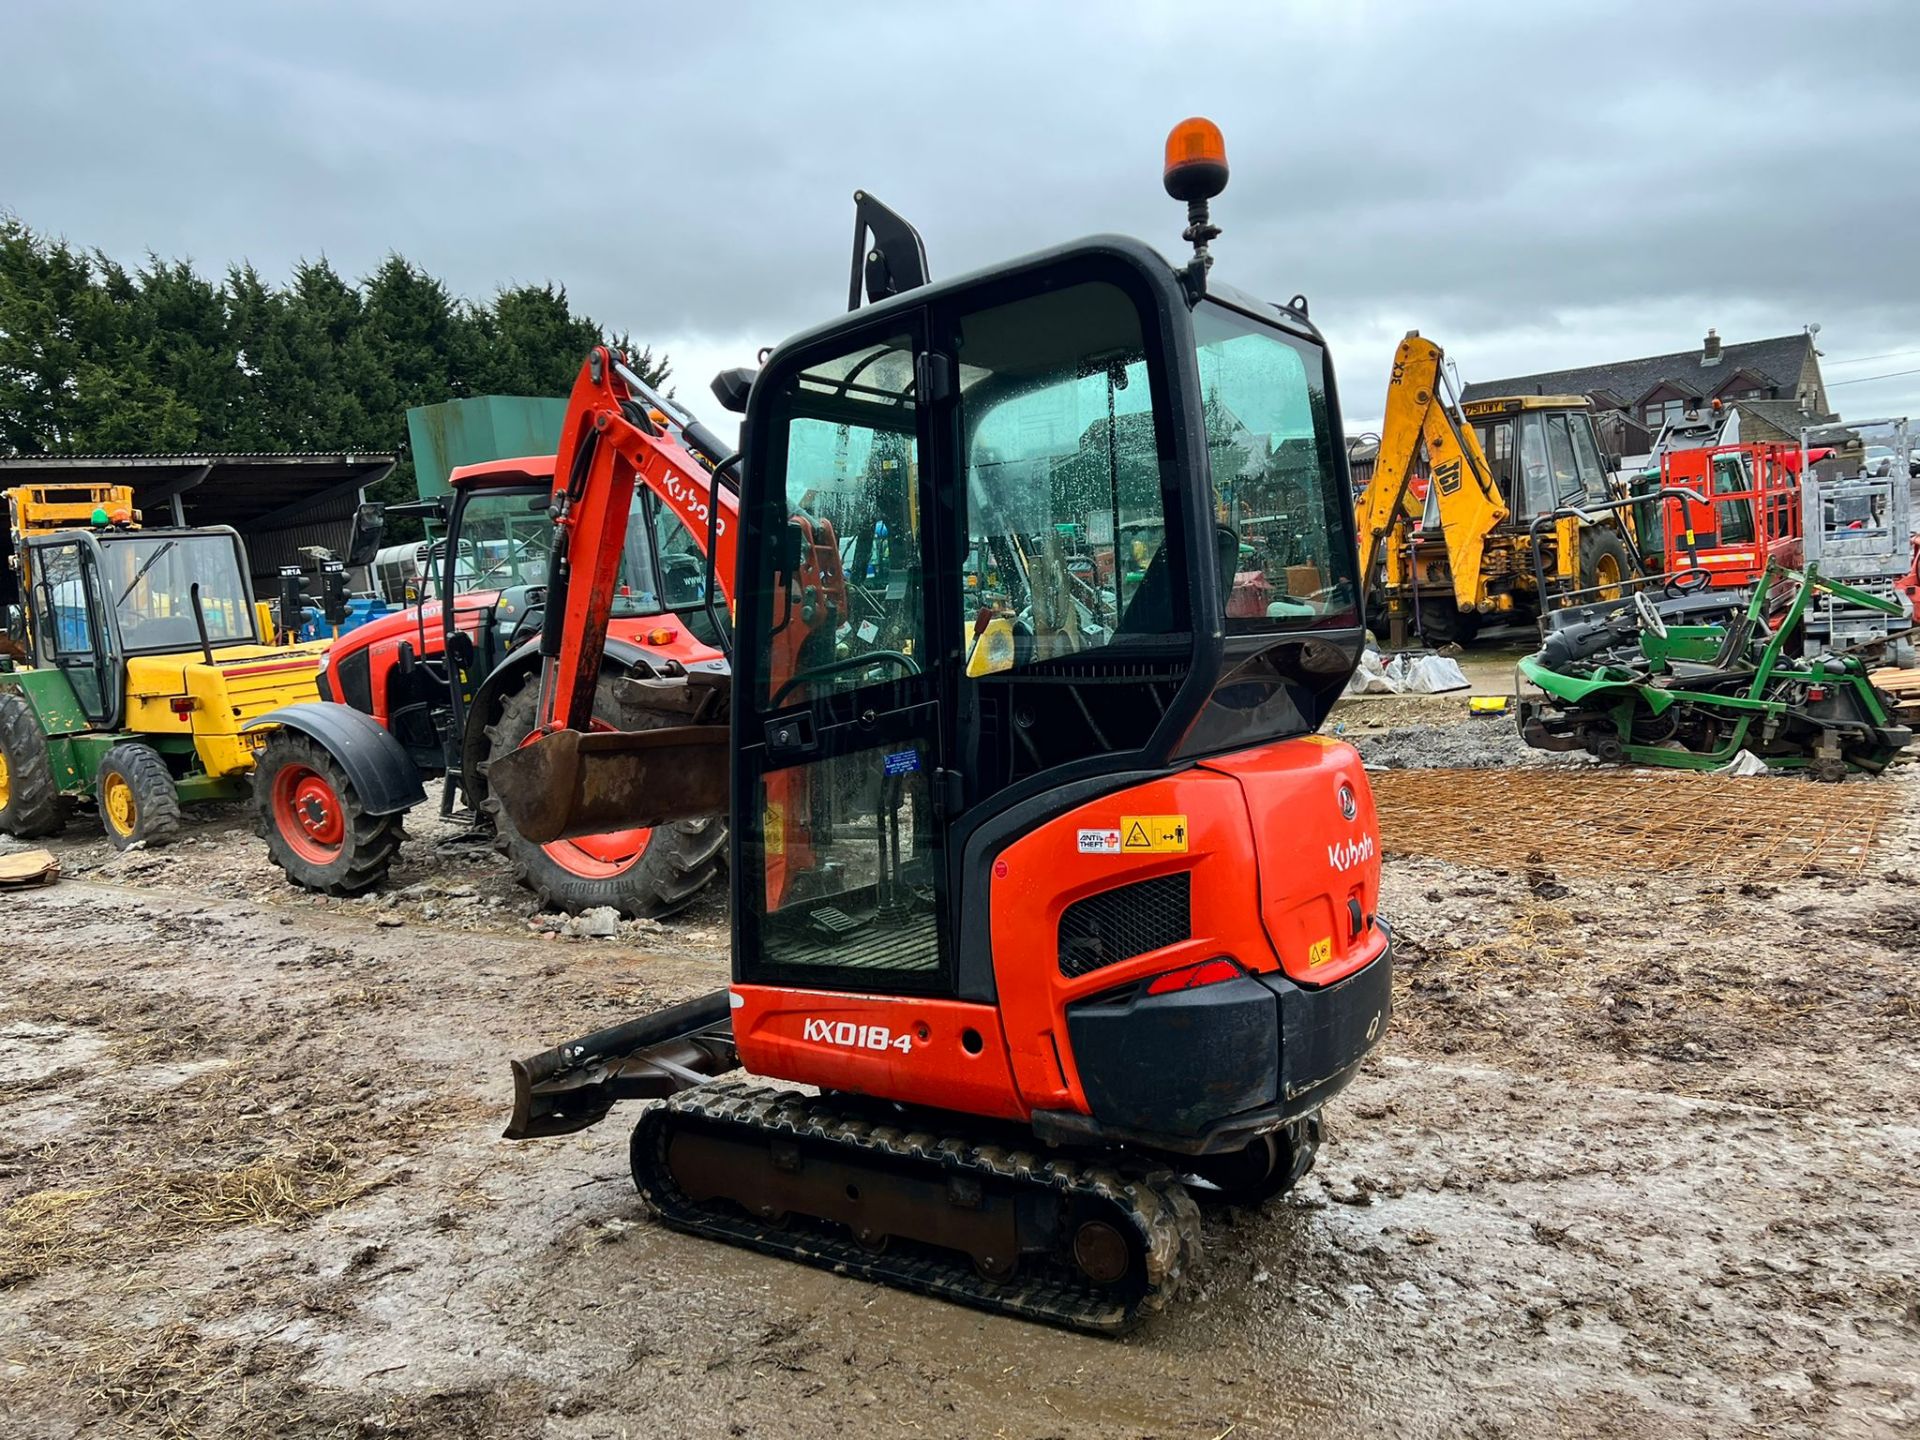 2018 KUBOTA KX018-4 1.8 TON MINI DIGGER, RUNS DRIVES AND DIGS, SHOWING A LOW 1681 HOURS - Image 5 of 20